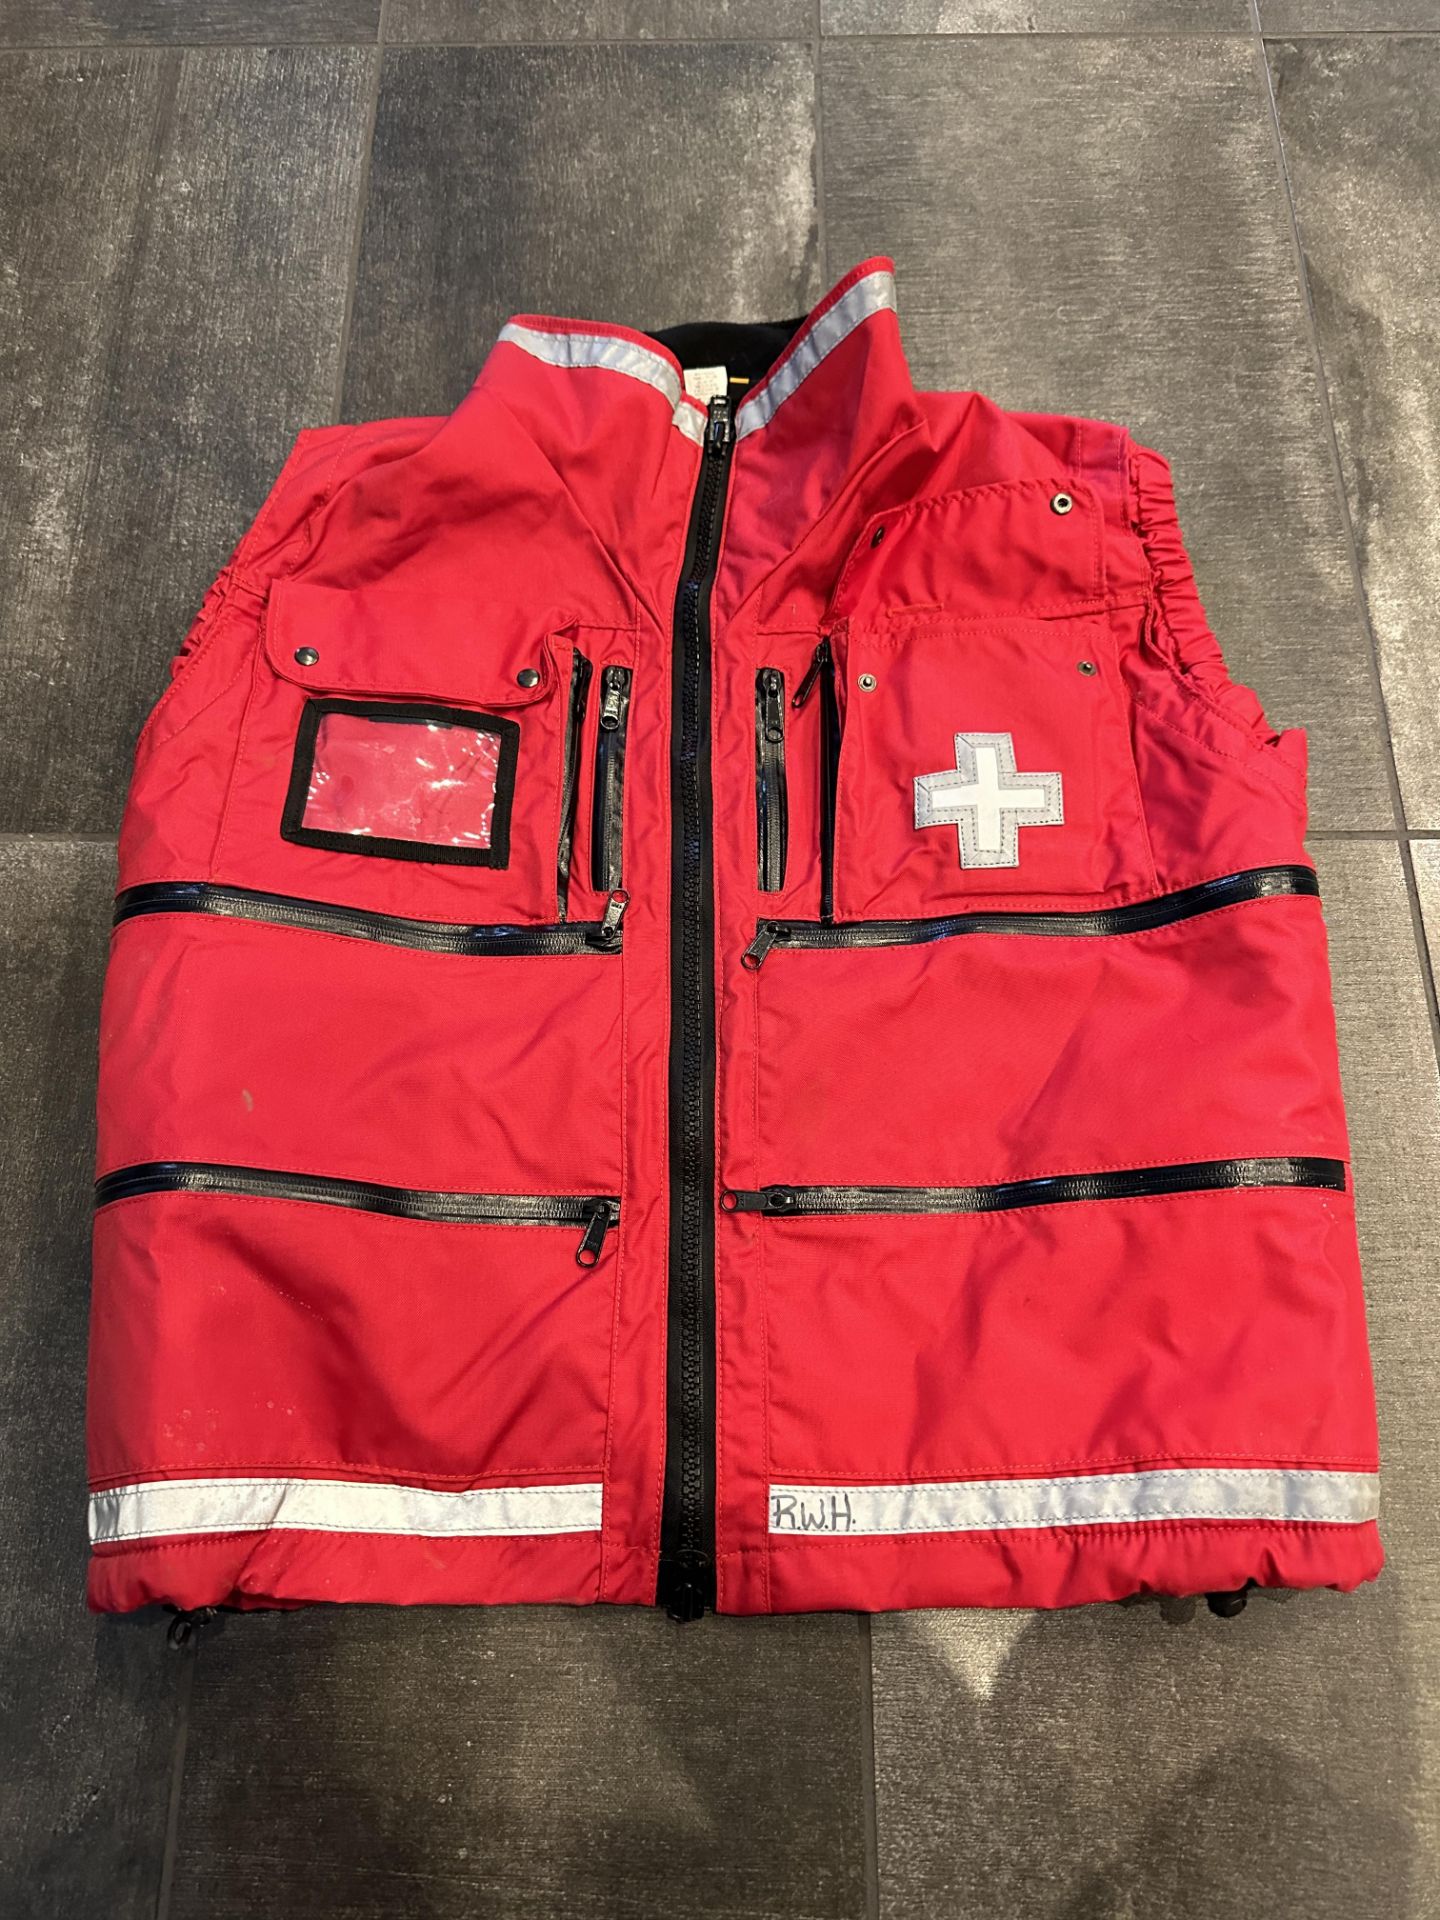 Authentic Rescue Vest For Winter Conditions, Very Warm